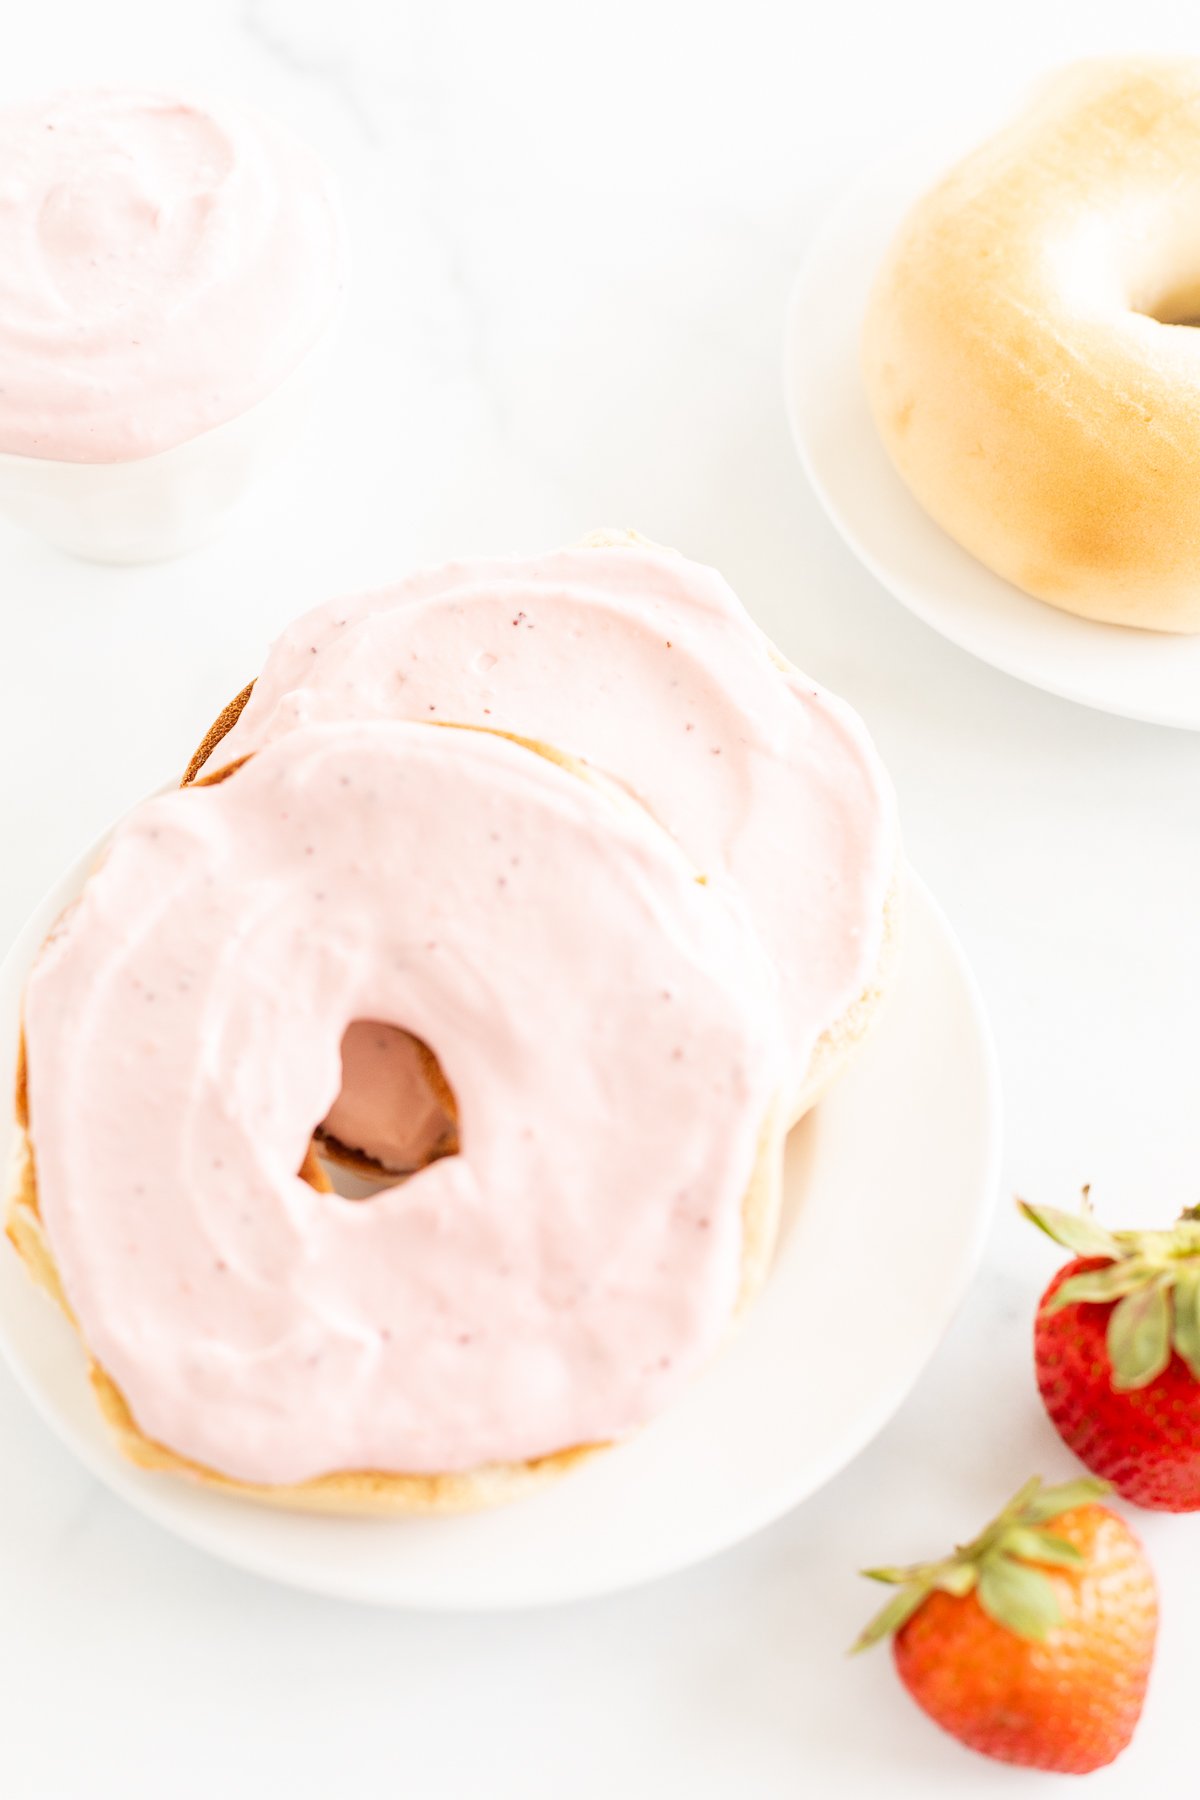 Strawberry cream cheese on a bagel.